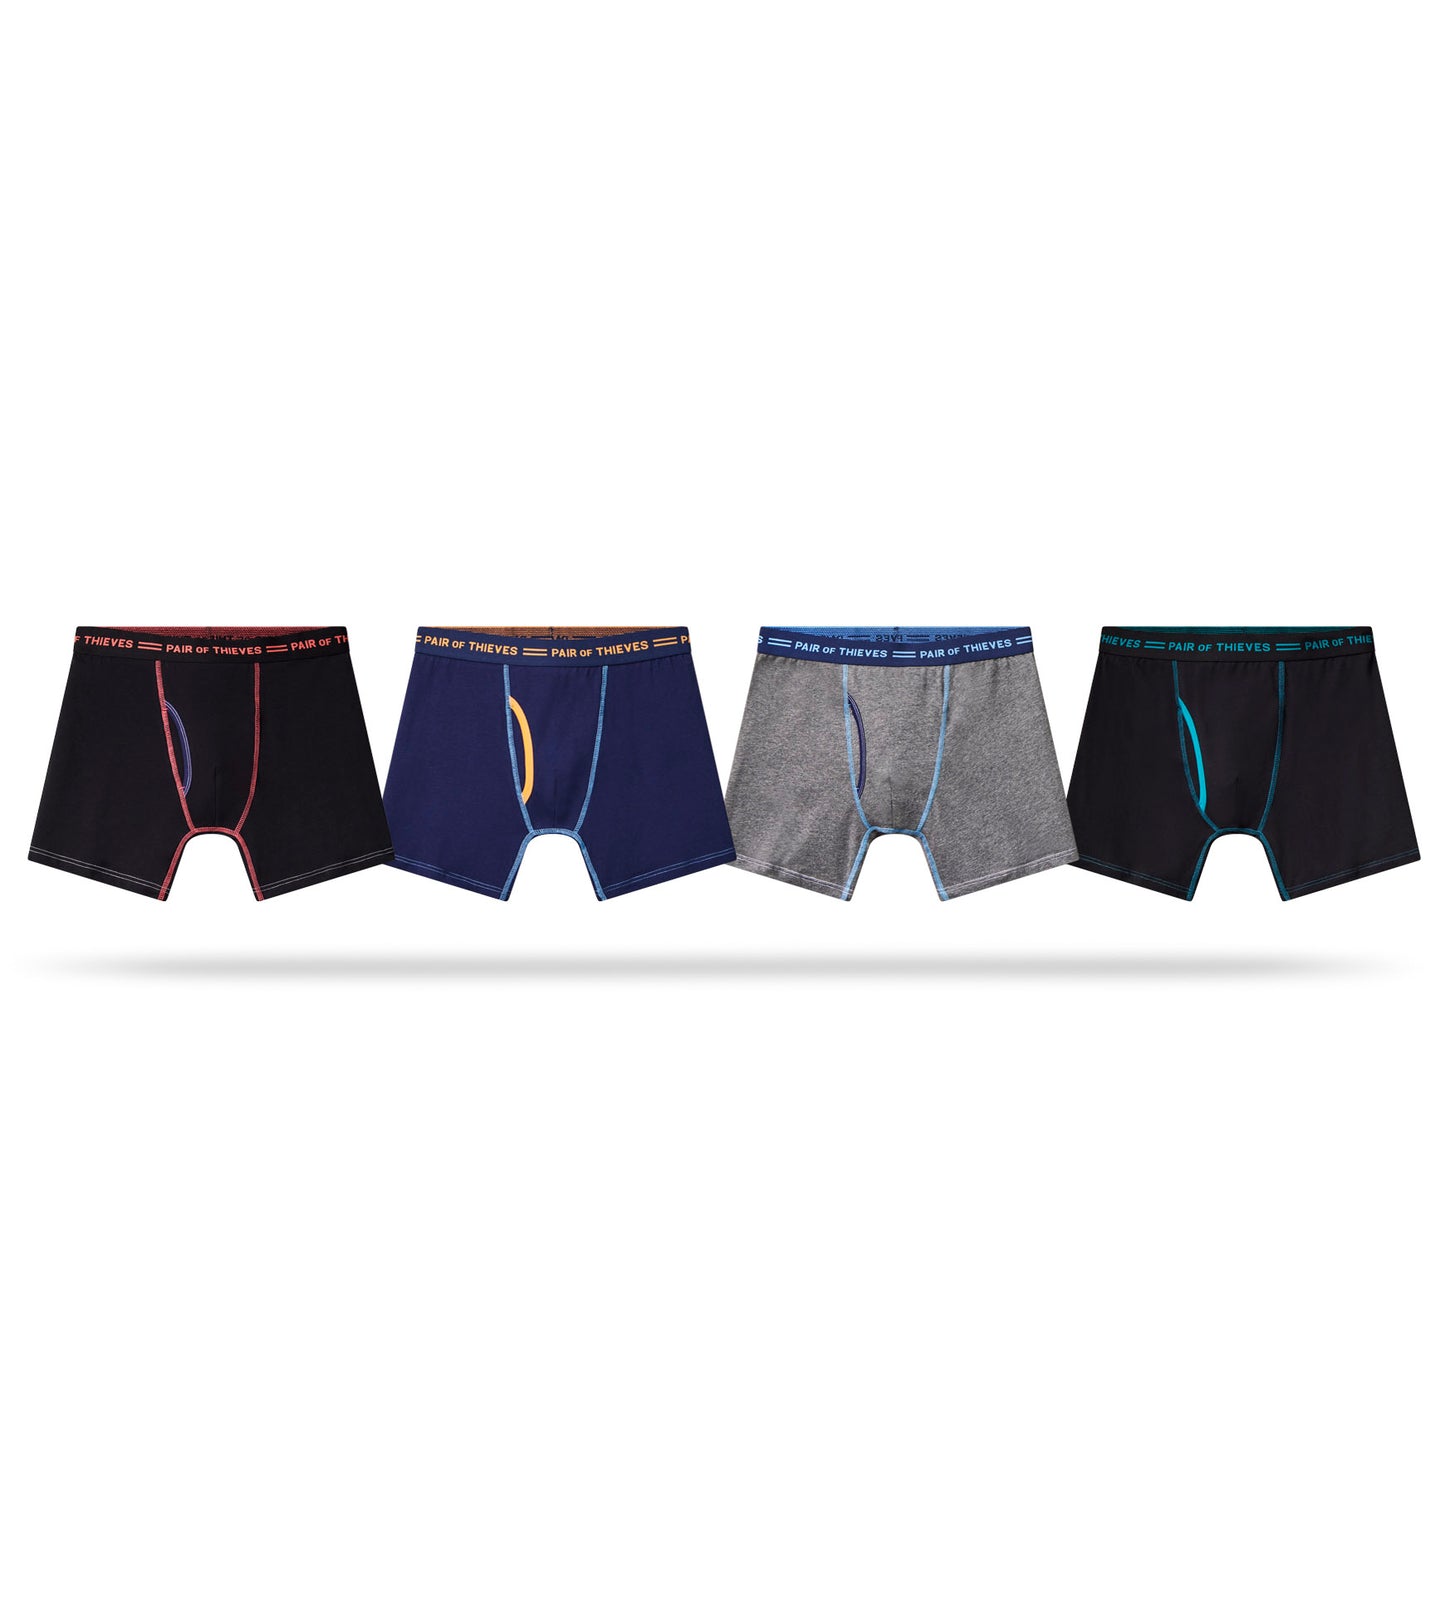 Every Day Kit Boxer Brief 4 Pack colors consists of Midnight blue, Gray, Black, Dim gray, Gains boro, Sienna, Dark Gray, Steel blue, Burly wood